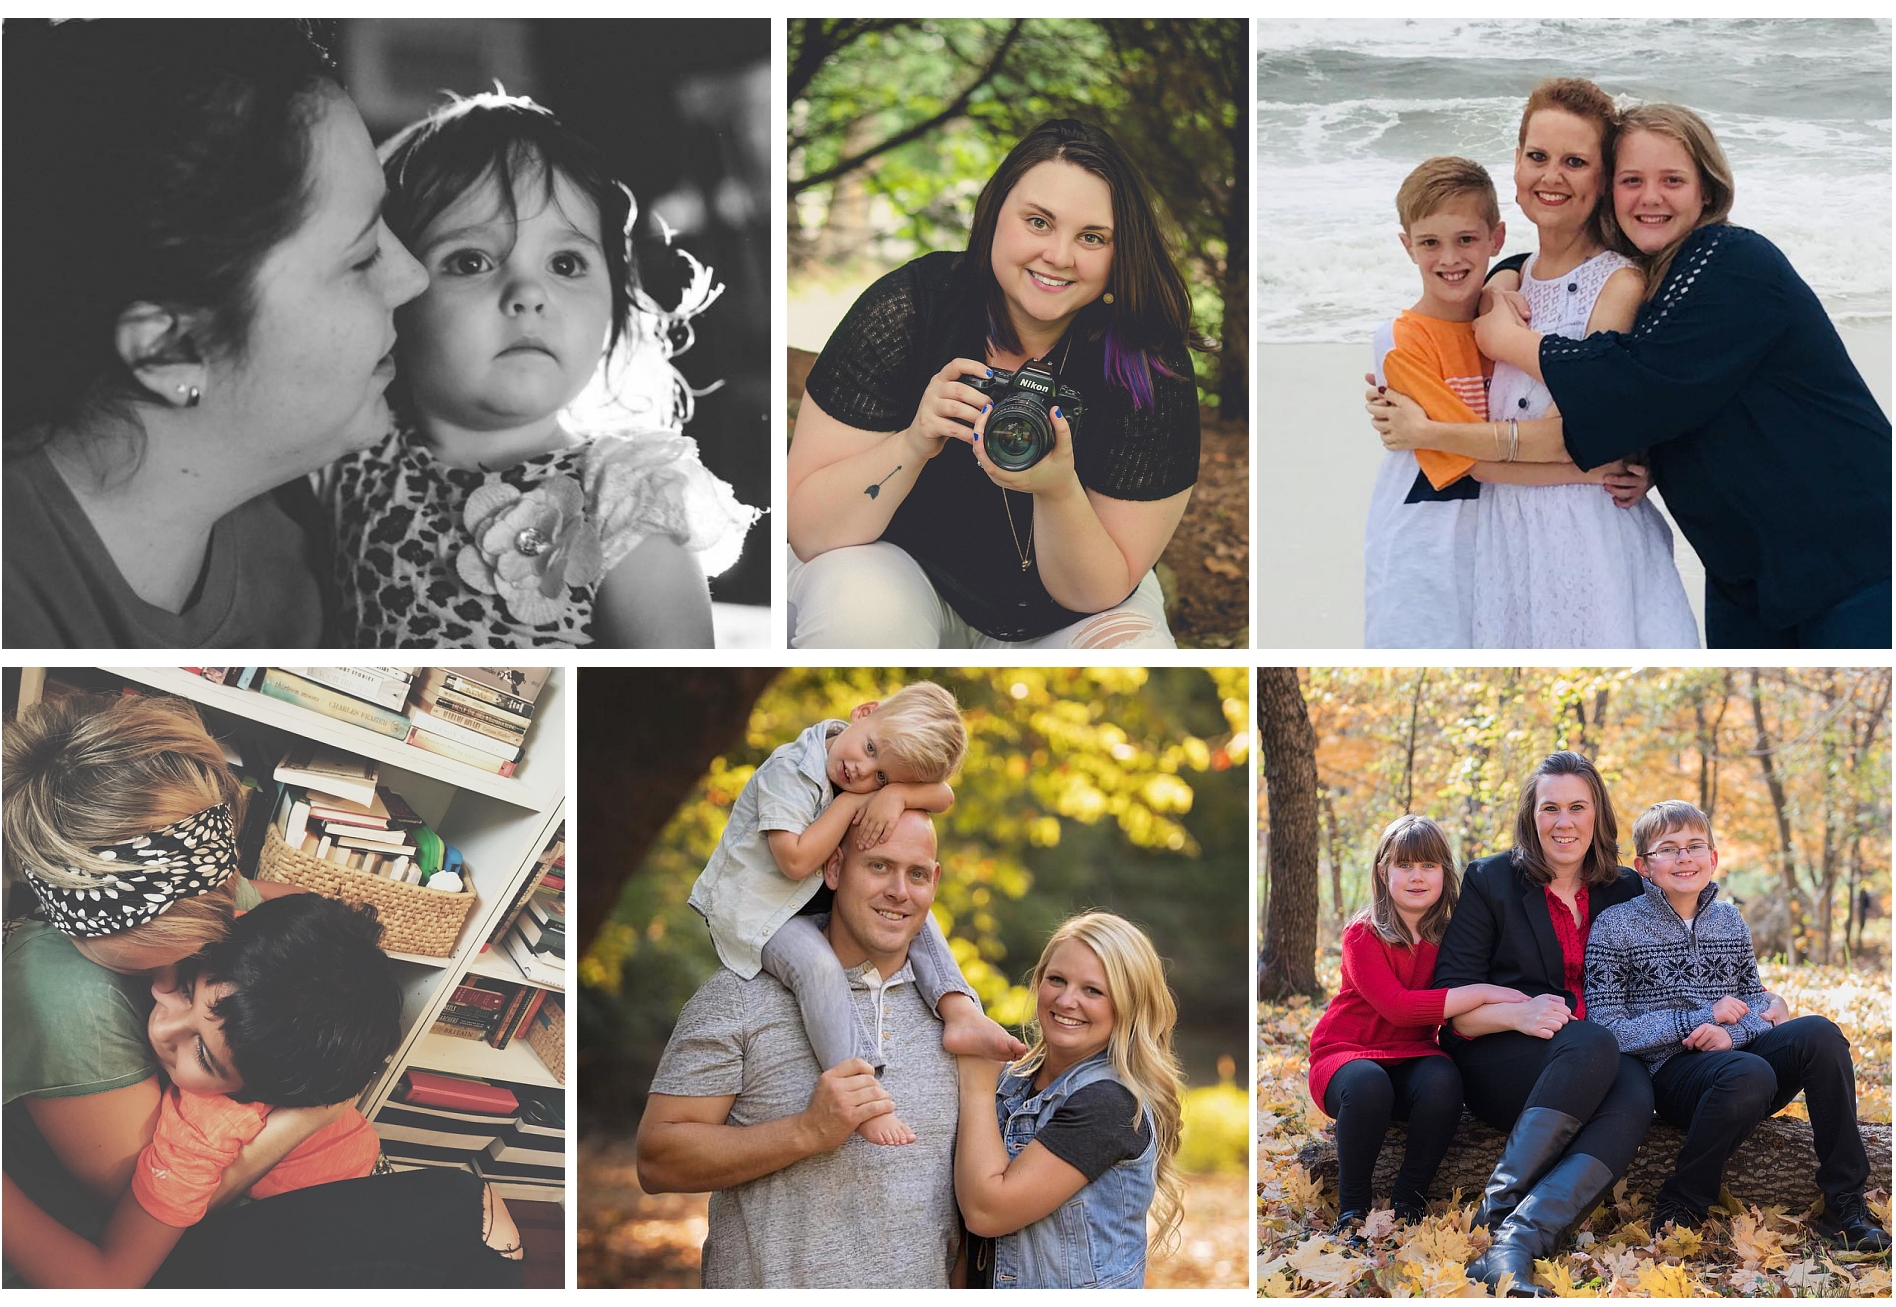 photography, self portraits, family photo, pictures of mom, kristina rose photography, photography tips, get in the photo